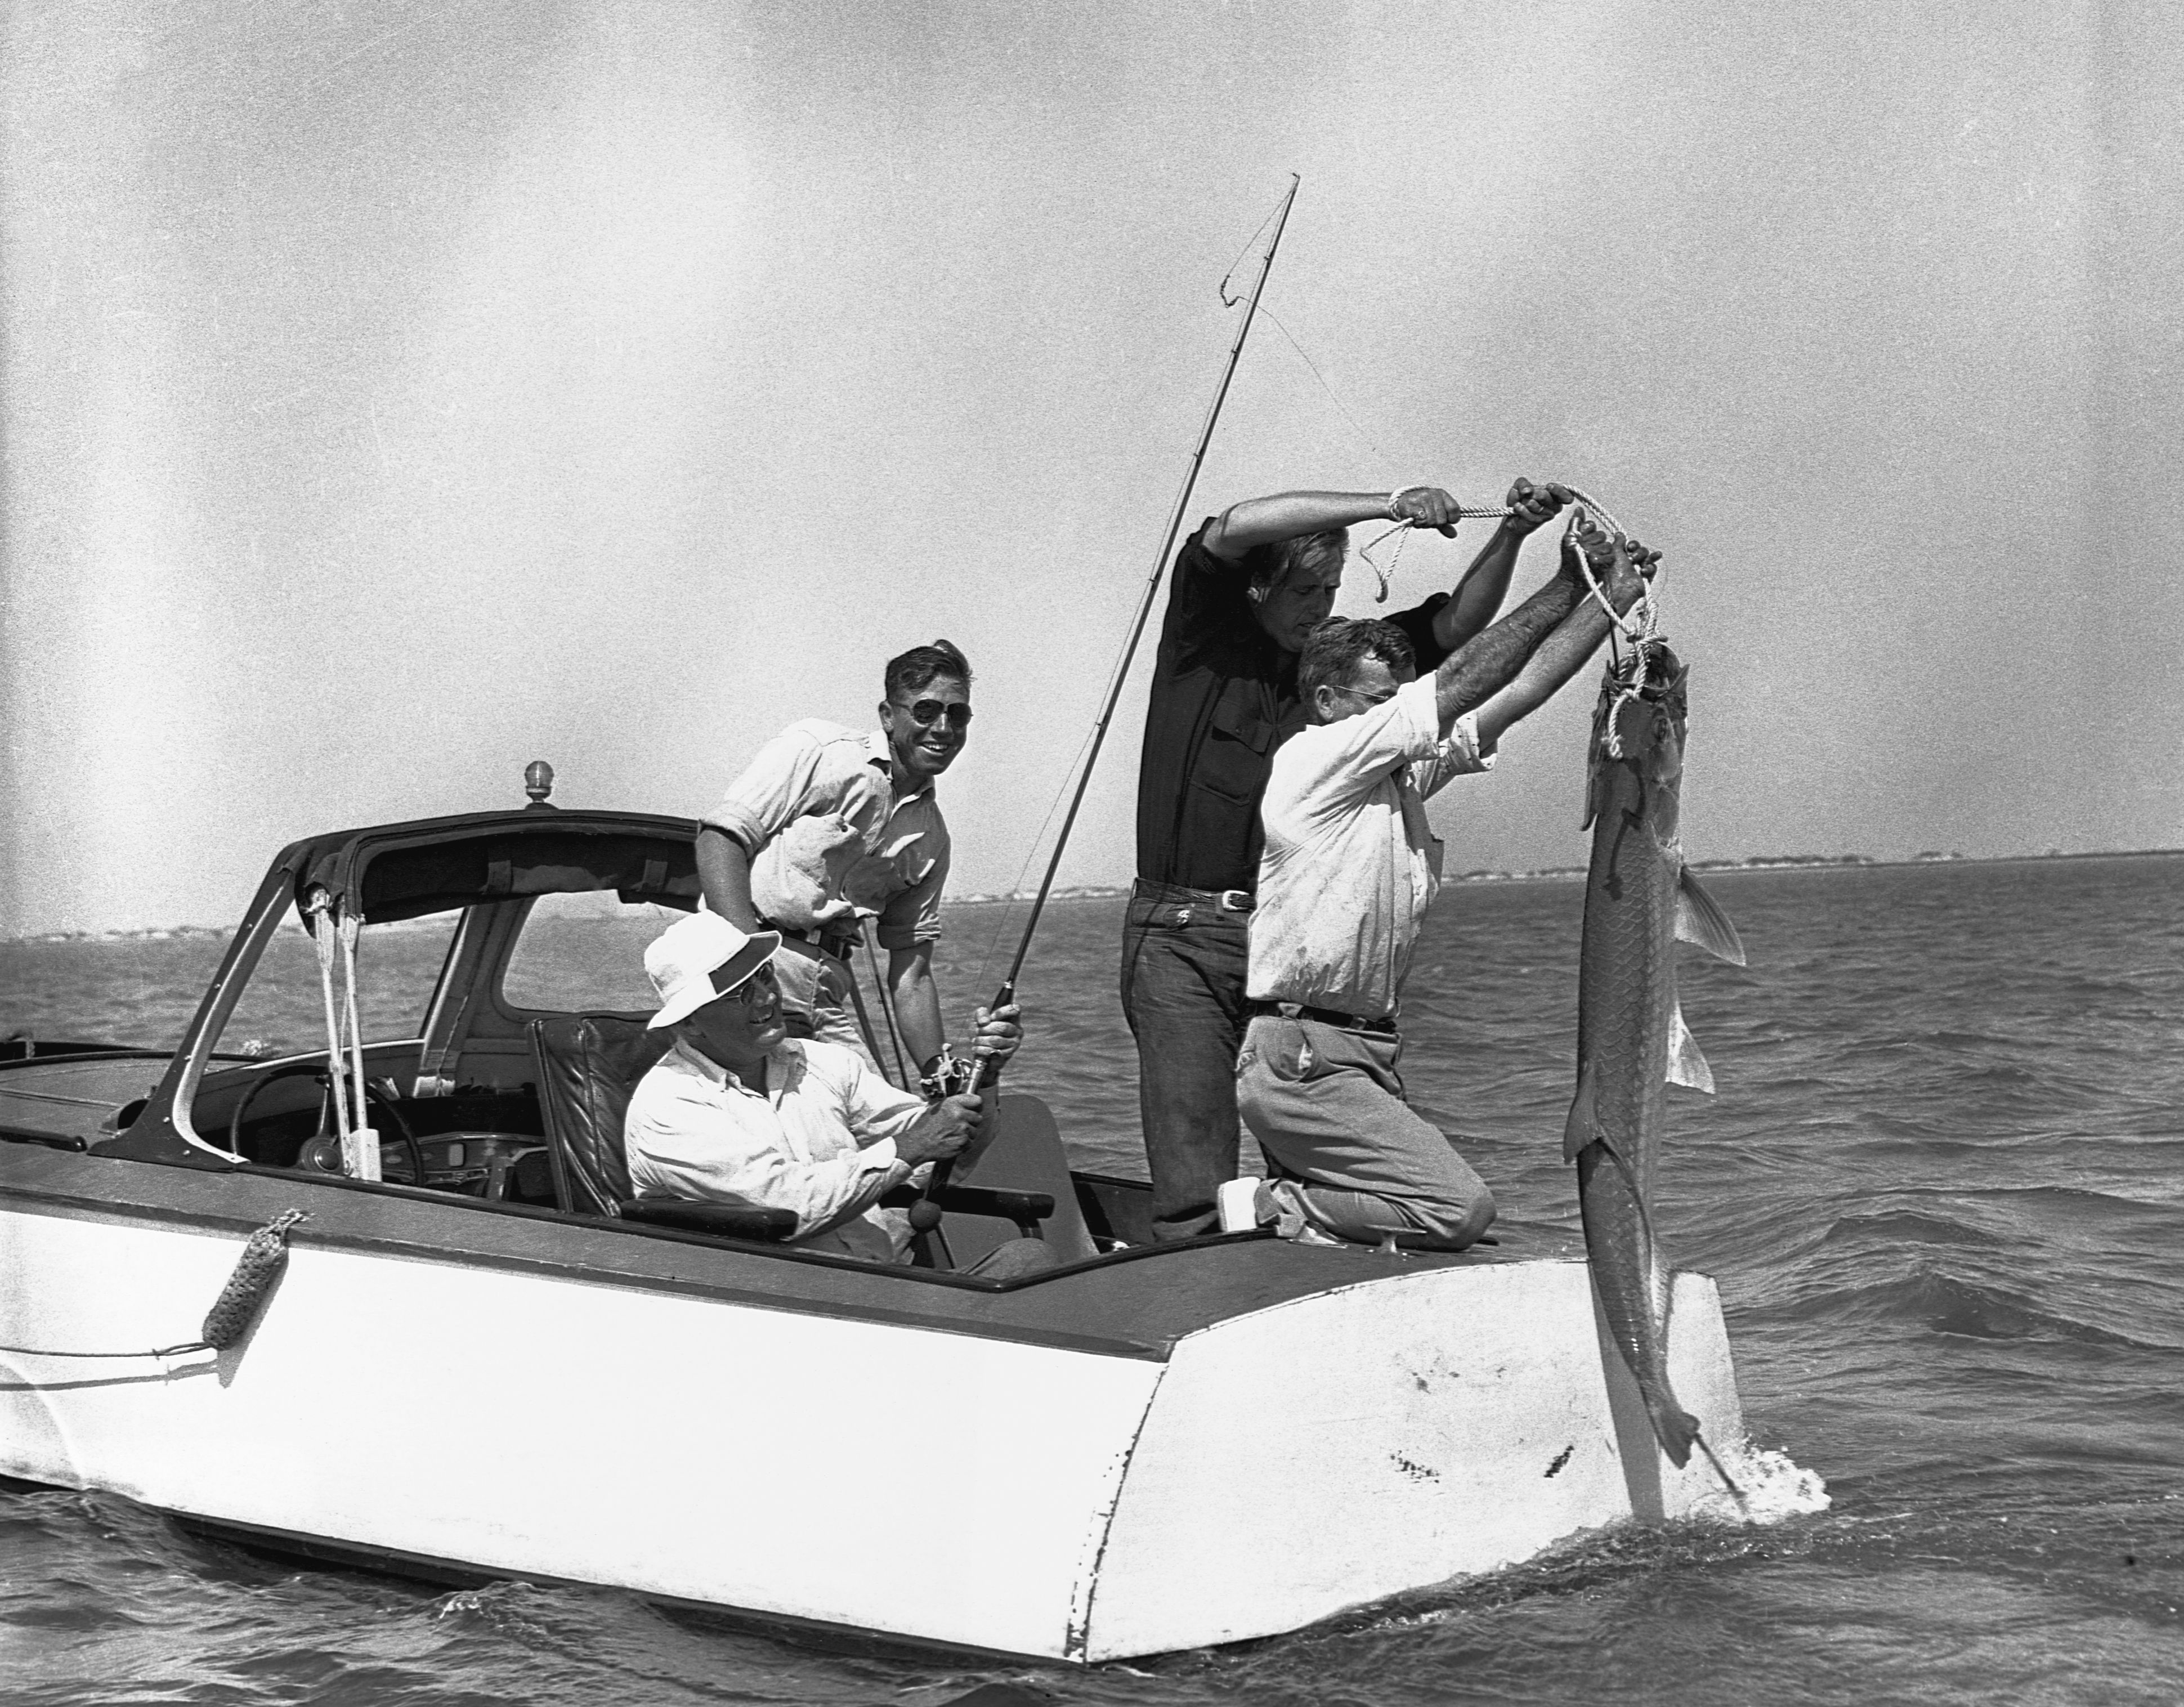 President Franklin Roosevelt catches a 77-pound tarpon in the Gulf of Mexico. His son Elliott (dark shirt) and fishing guide Barney Farley help pull the fish aboard their motorboat. 